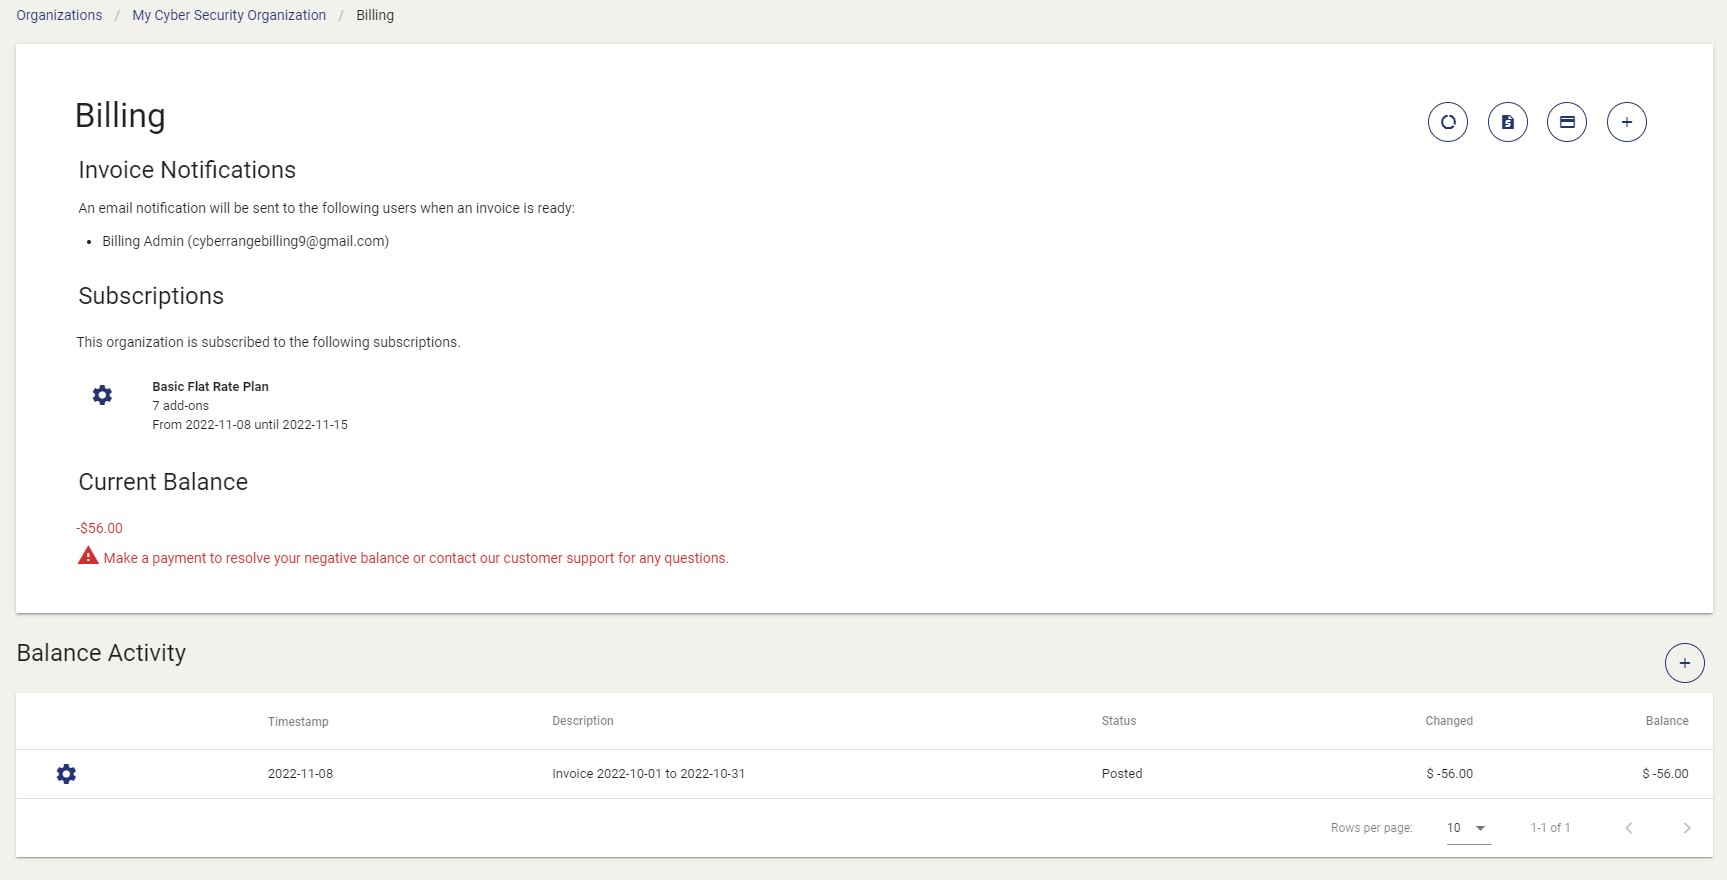 The billing page includes invoice notifications, subscriptions, current balance, and balance activity.